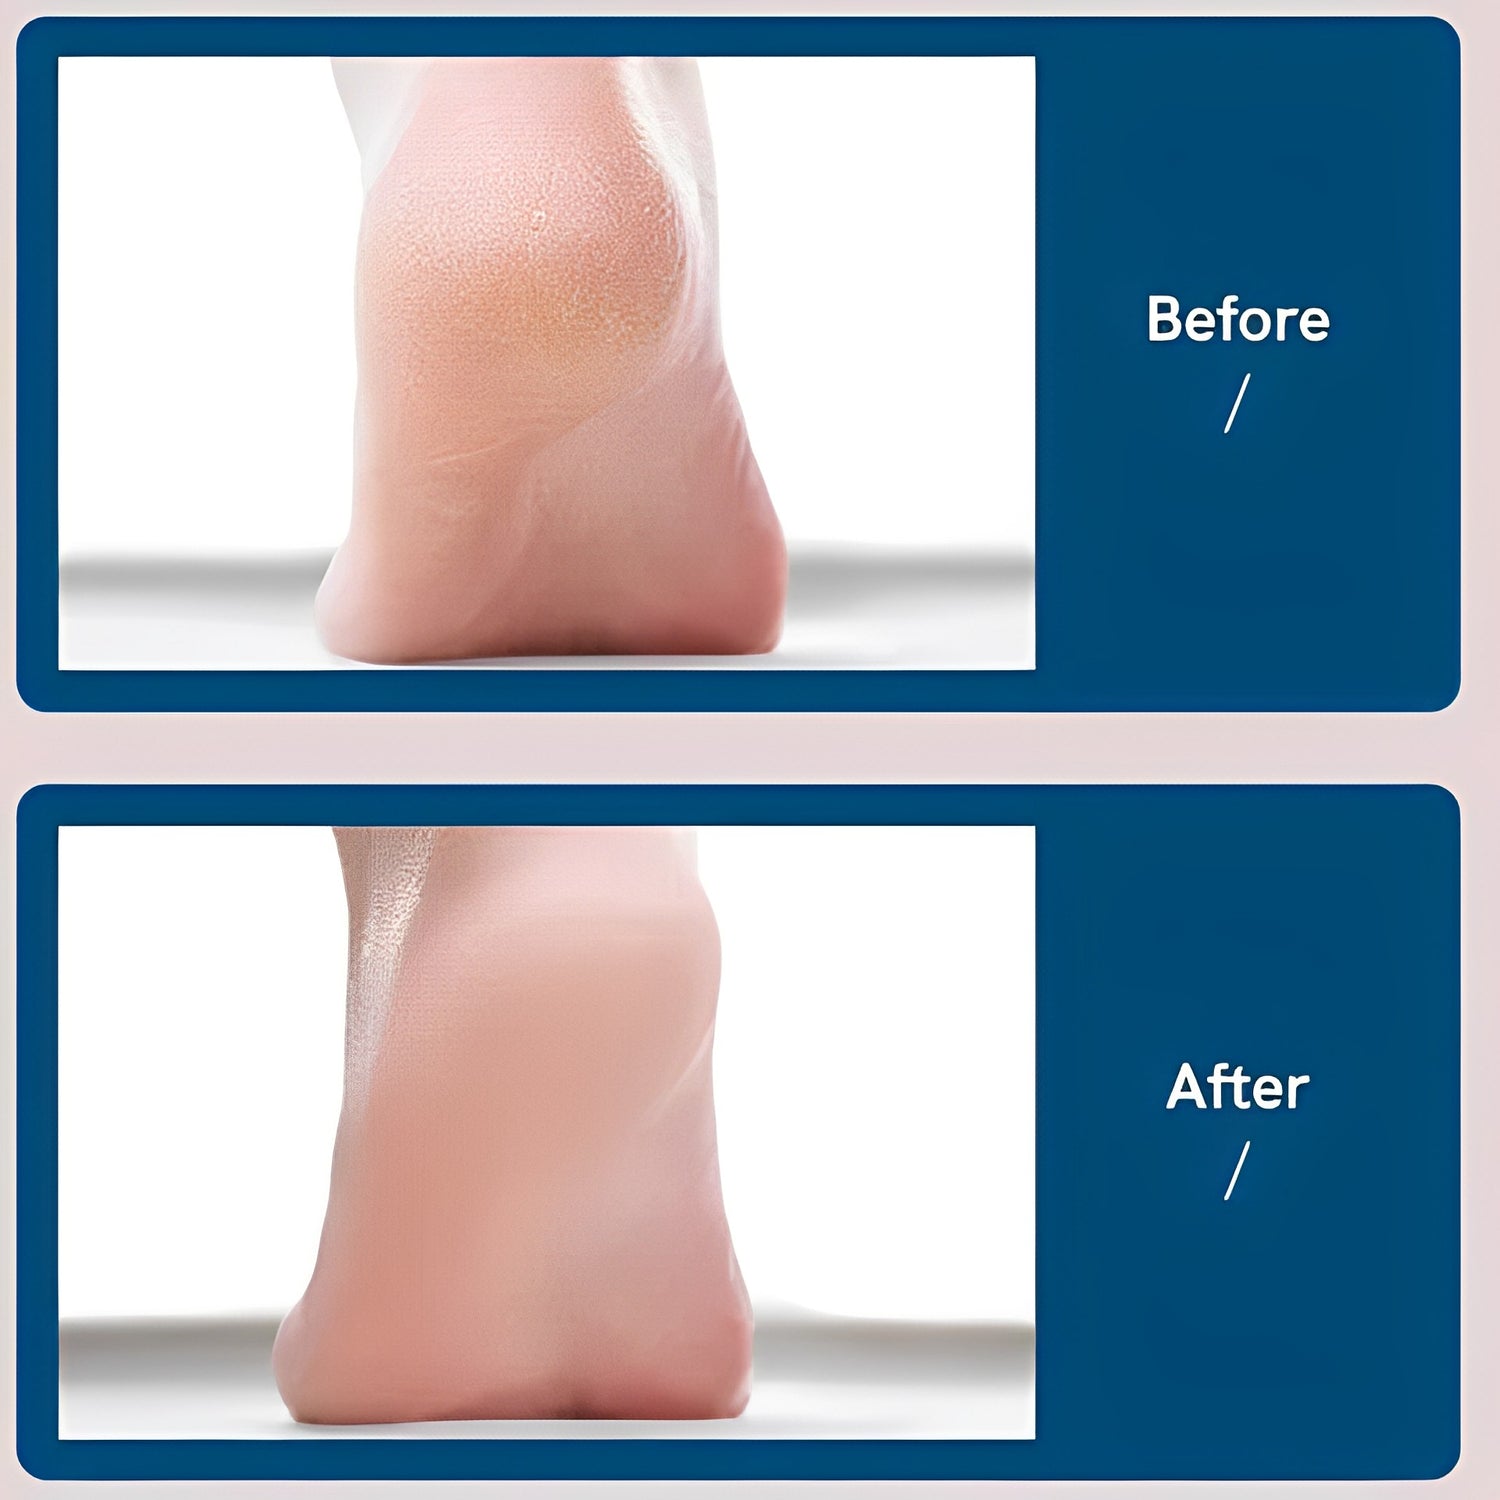 Before and after using foot wand! The results speak for themselves